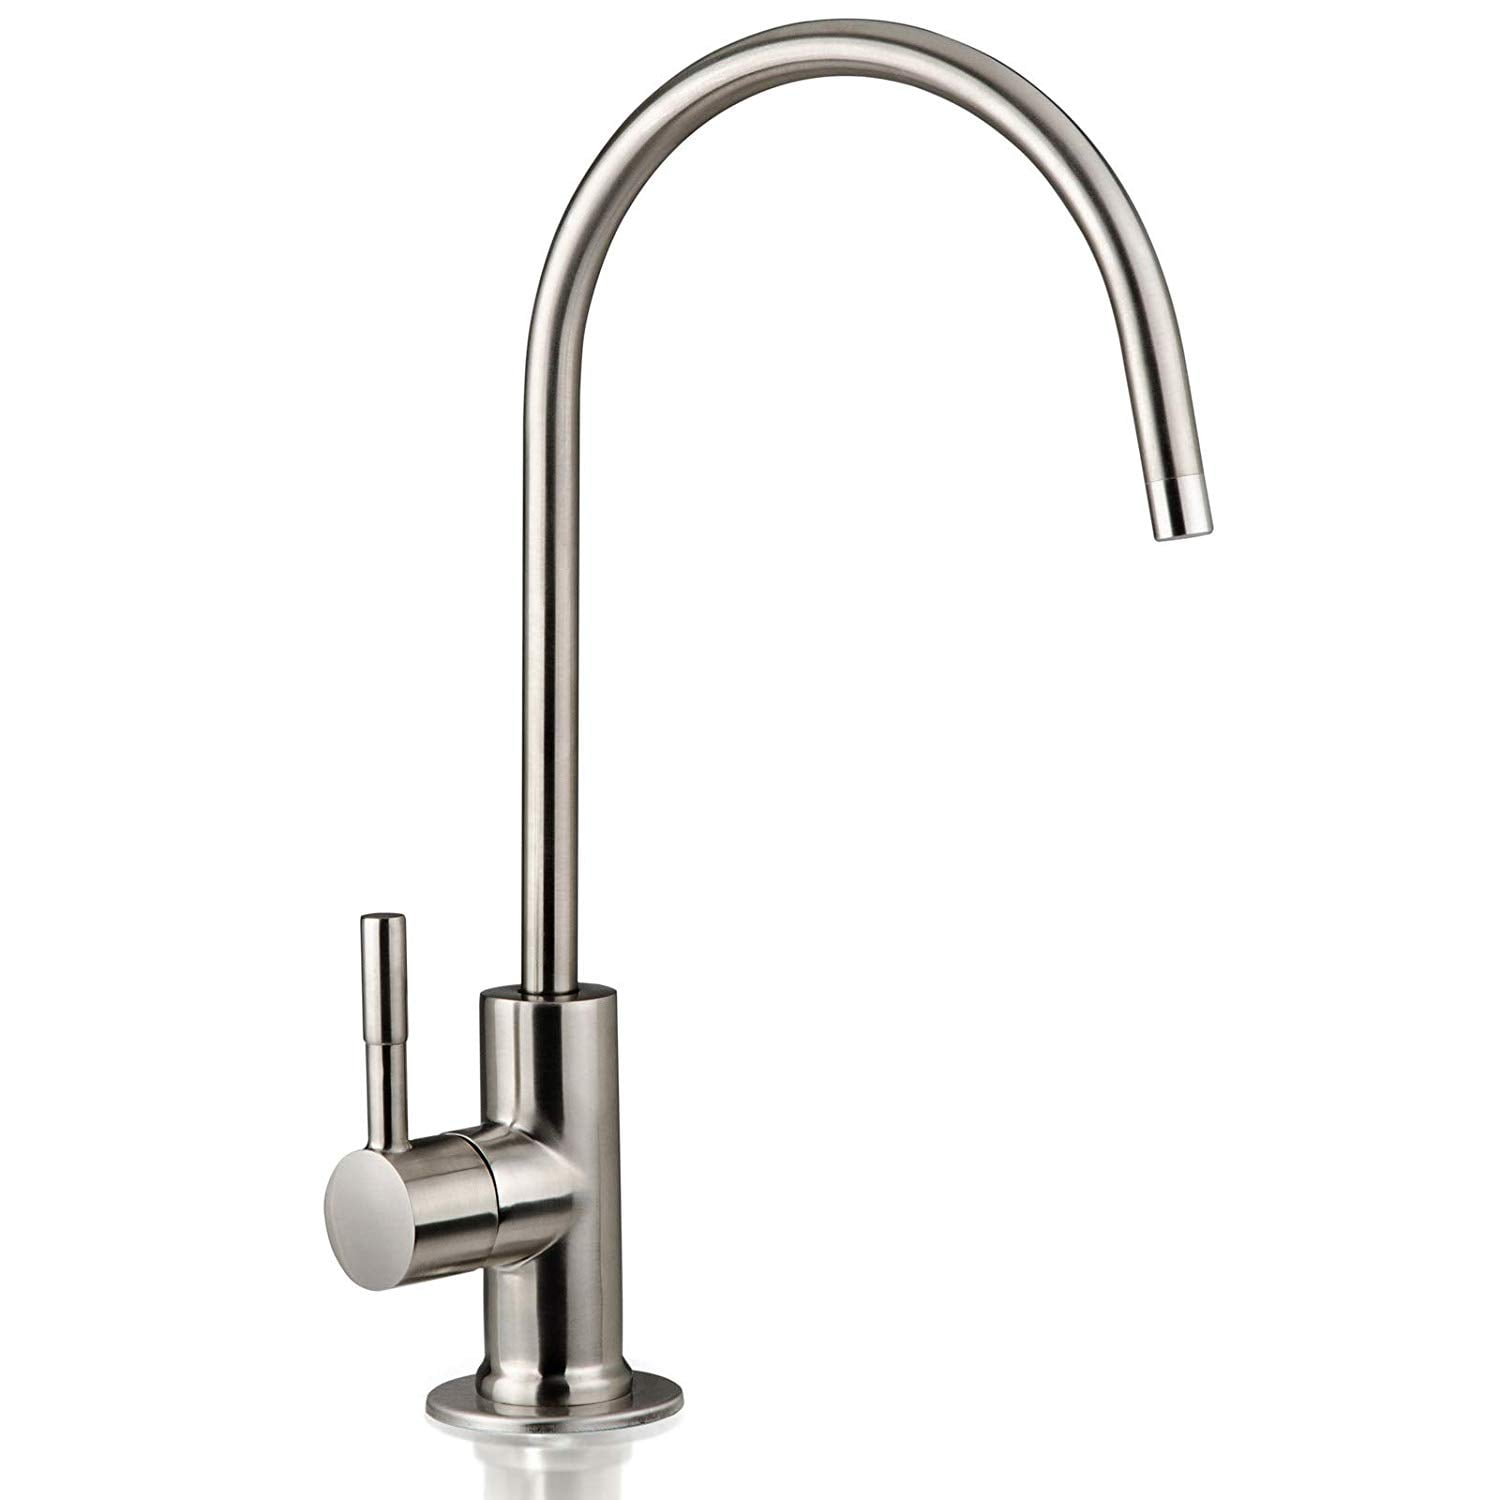 Ispring Ga1 Bn Heavy Duty Non Air Gap Drinking Faucet For Water